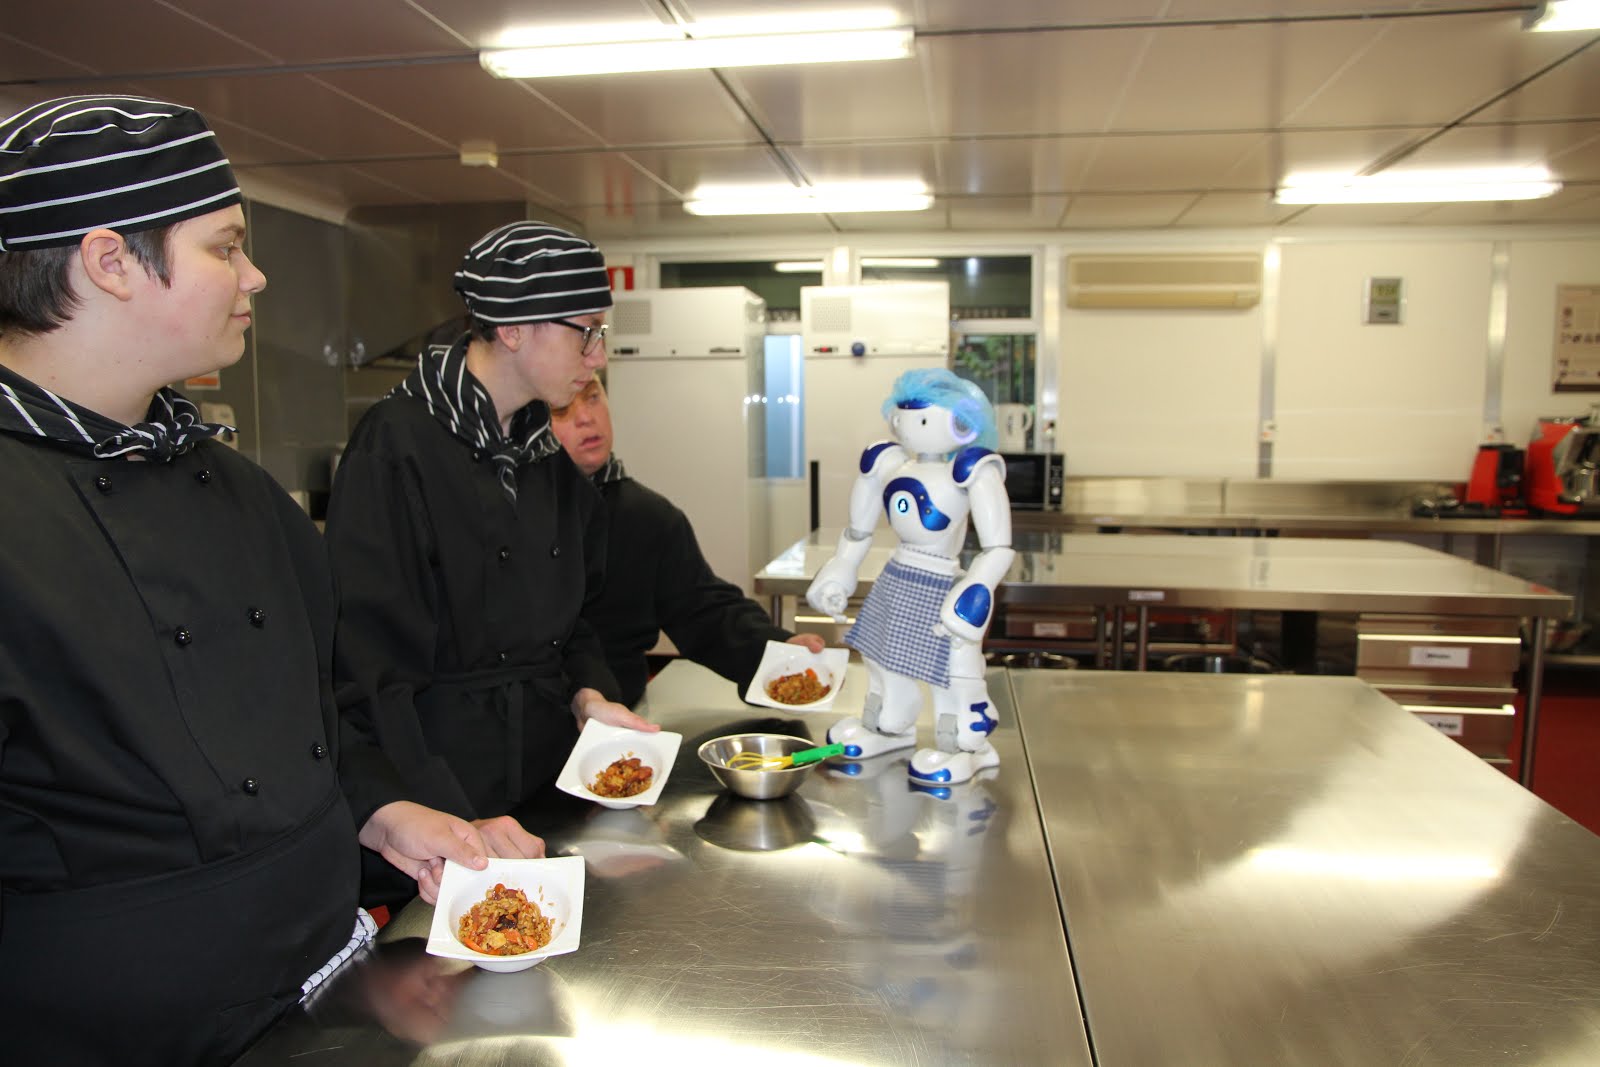 We made chorizo fried rice under instruction from Phil, our NAO robot.